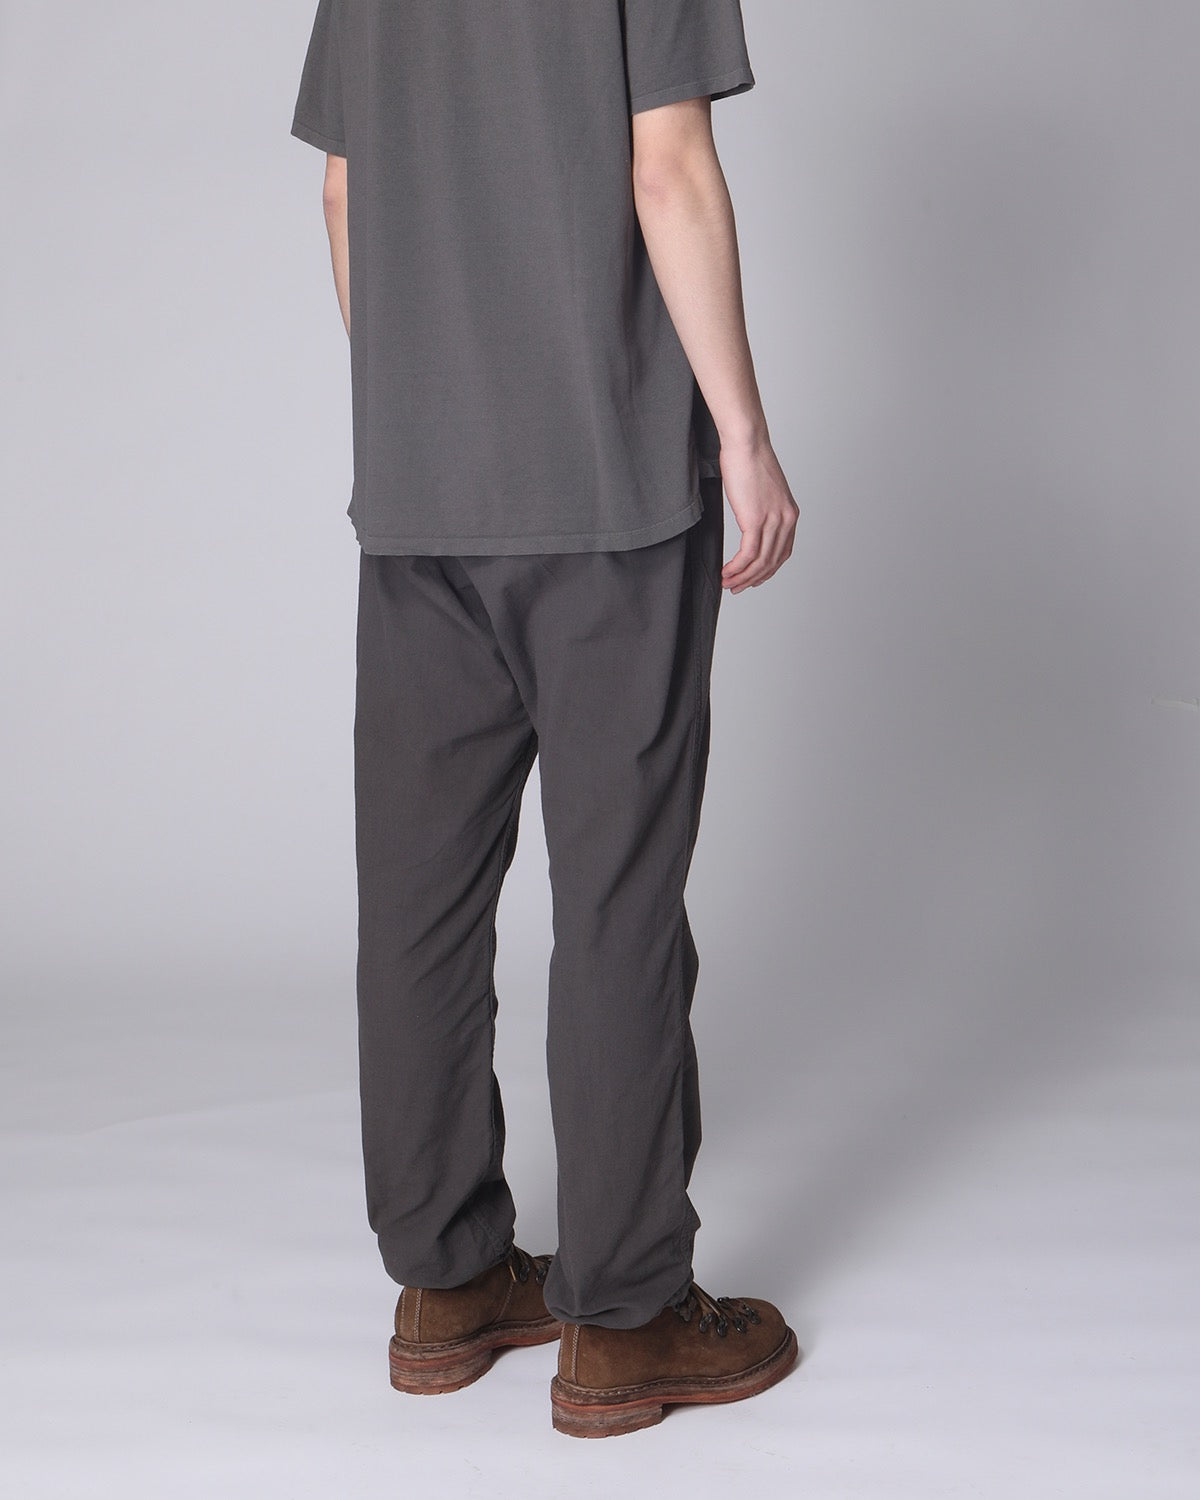 WALKER EASY PANTS COTTON PAPER VIERA OVERDYED